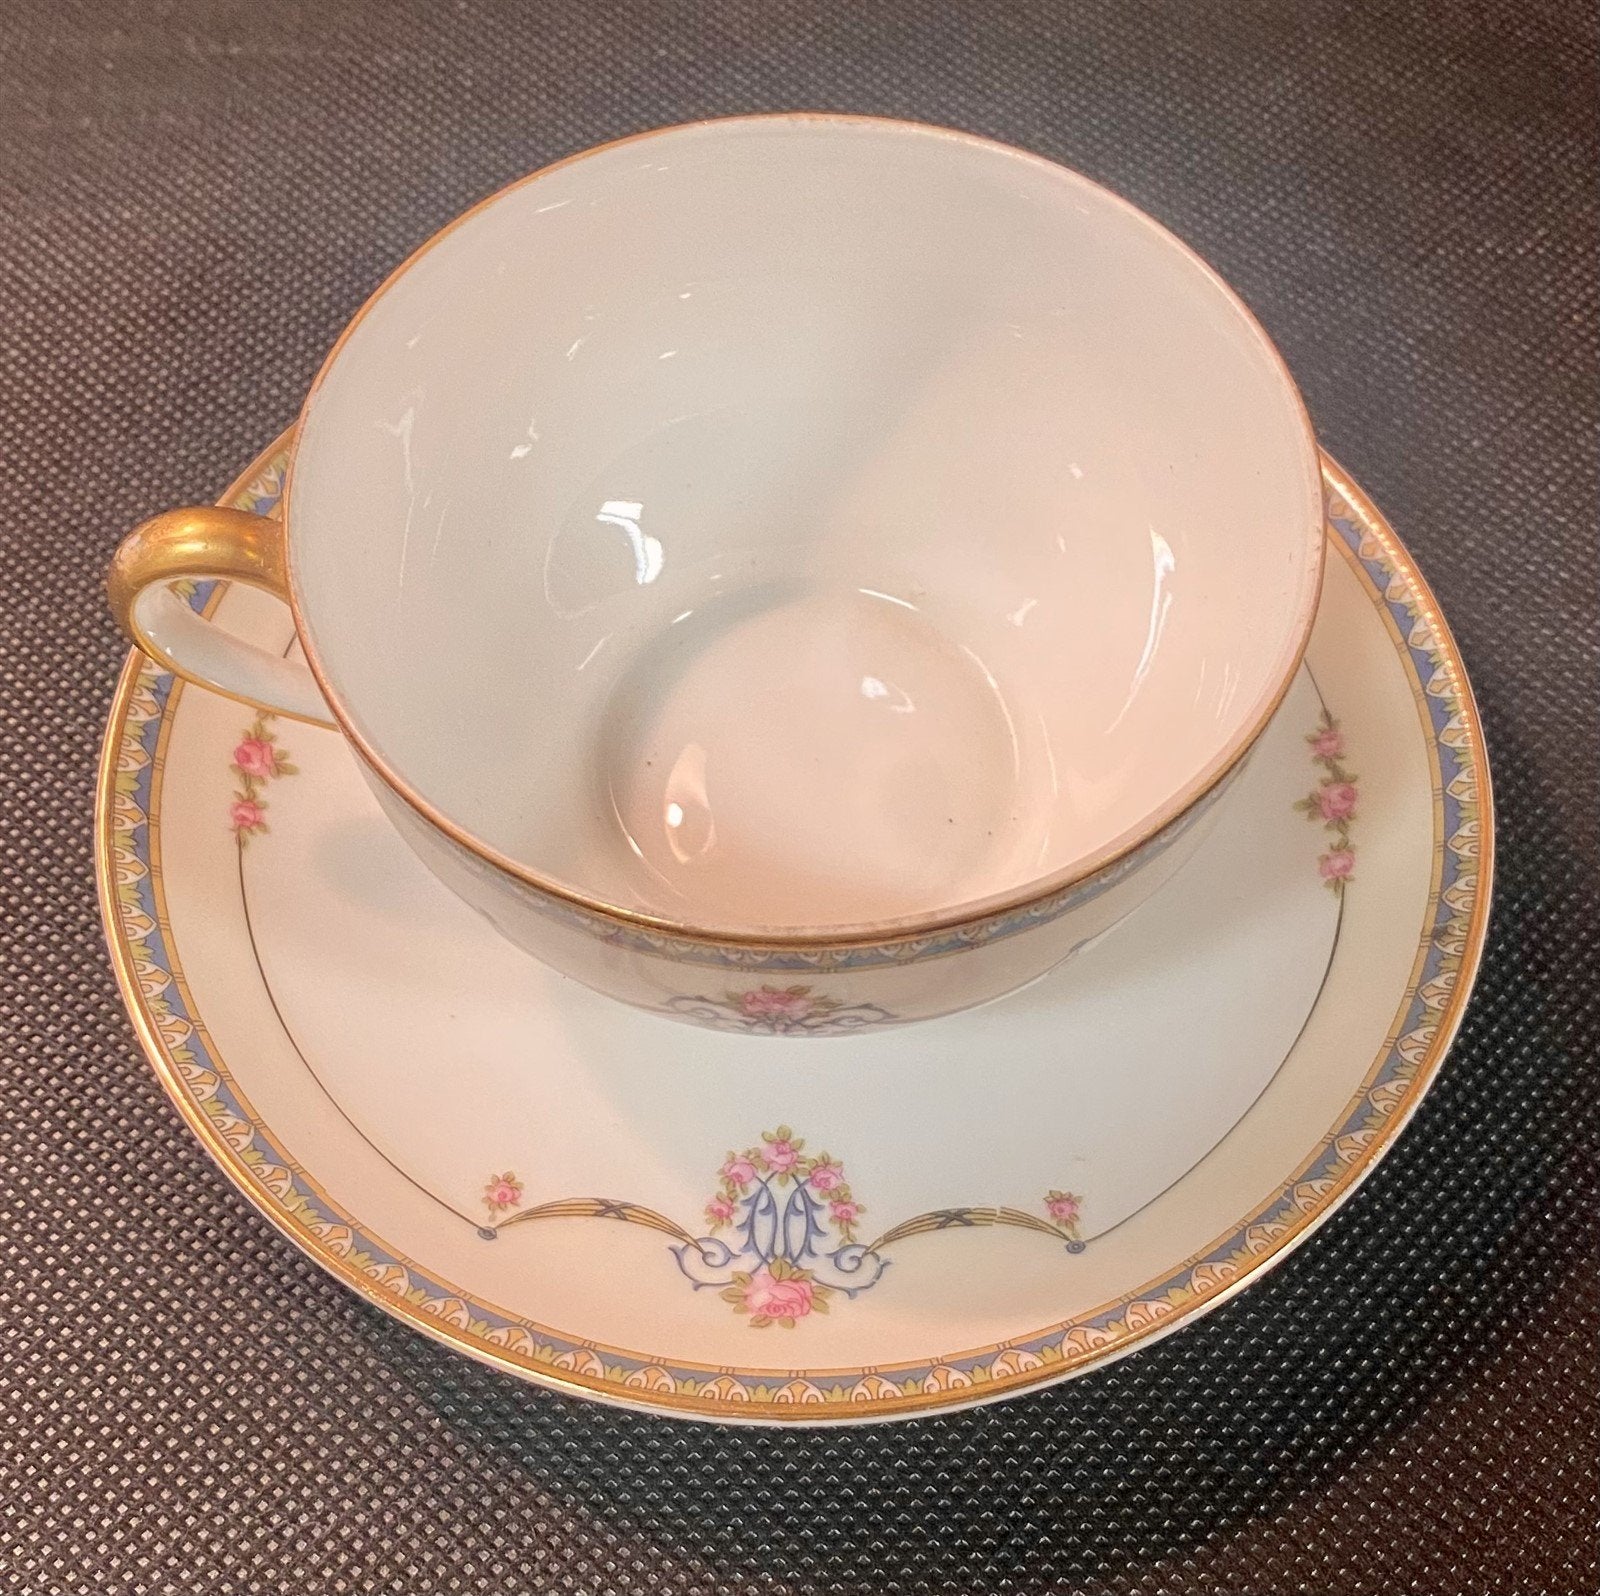 1920s Antique Noritake Japan Teacup and Saucer in Laureate Pattern w / Gold Trim